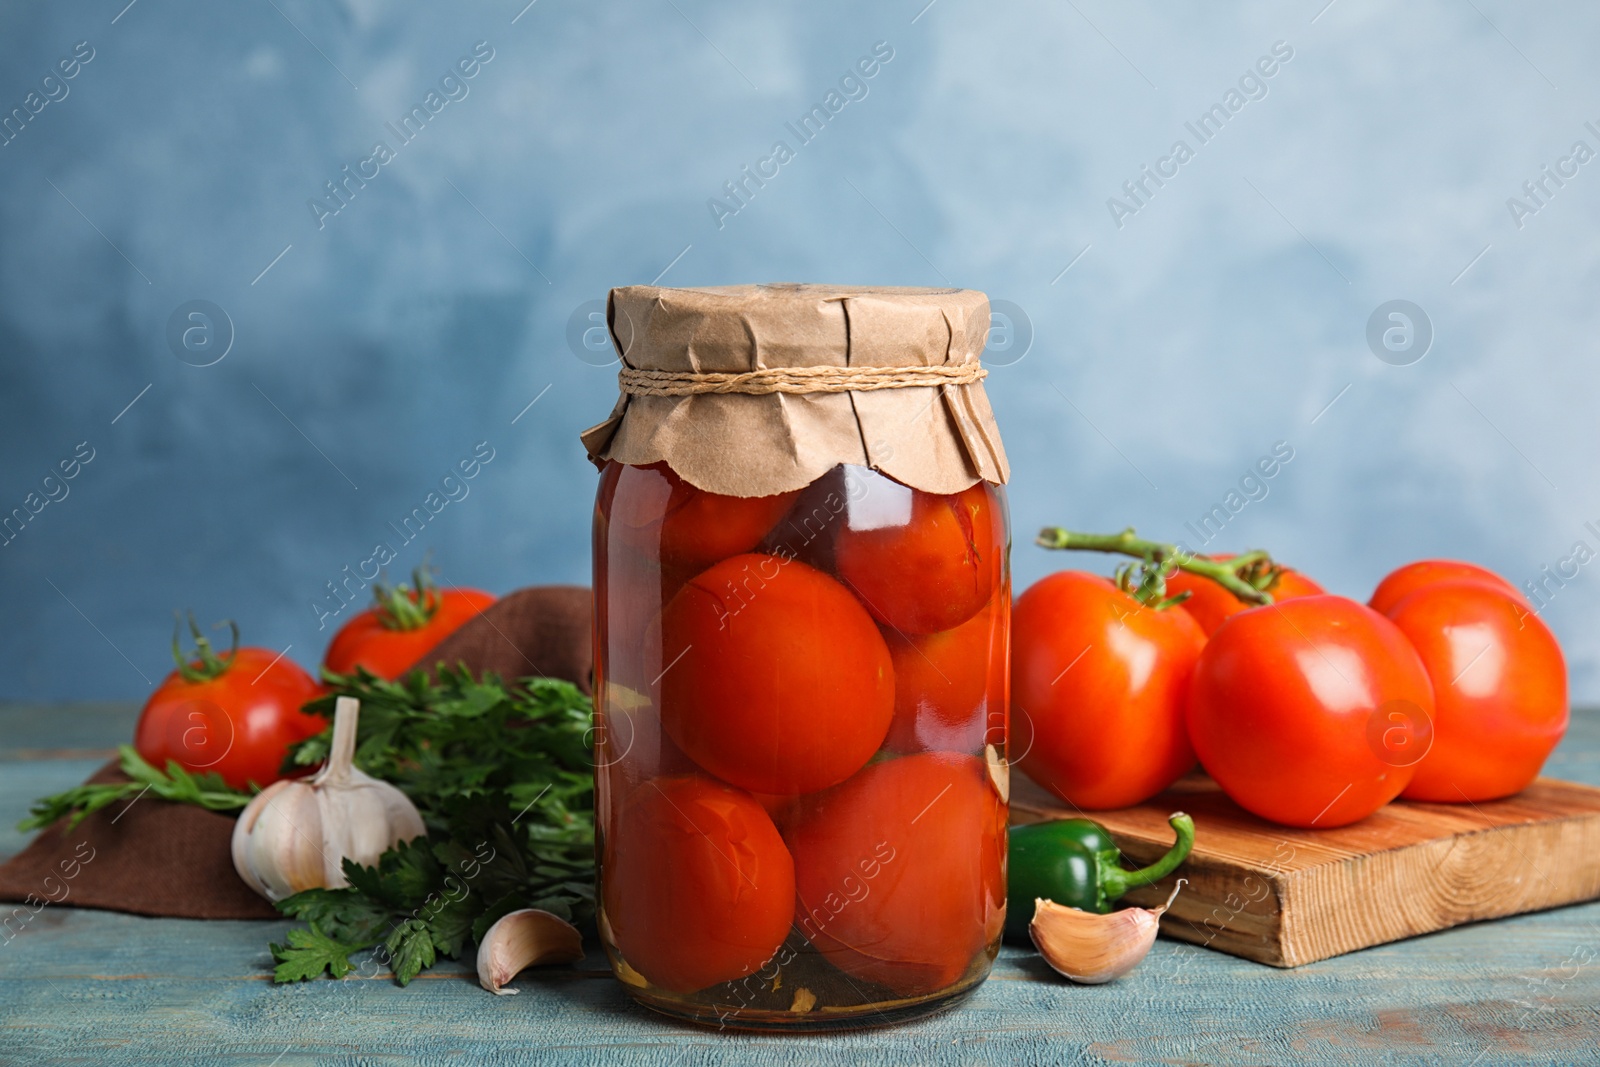 Photo of Pickled tomatoes in glass jar and products on wooden table against blue background